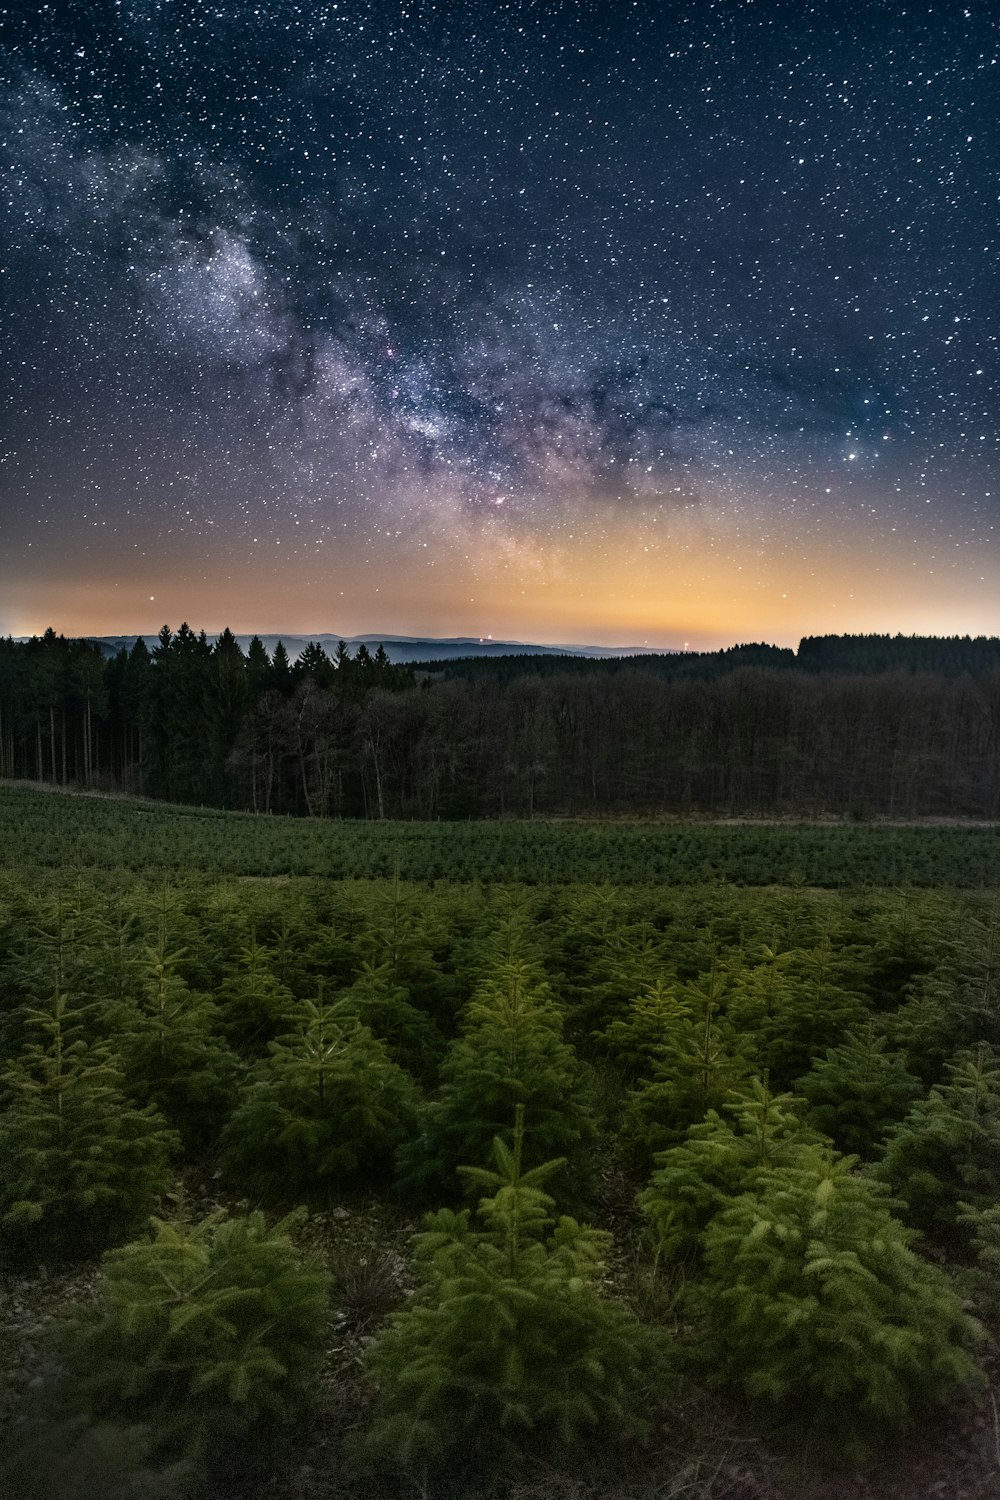 green trees under blue sky with stars during night time